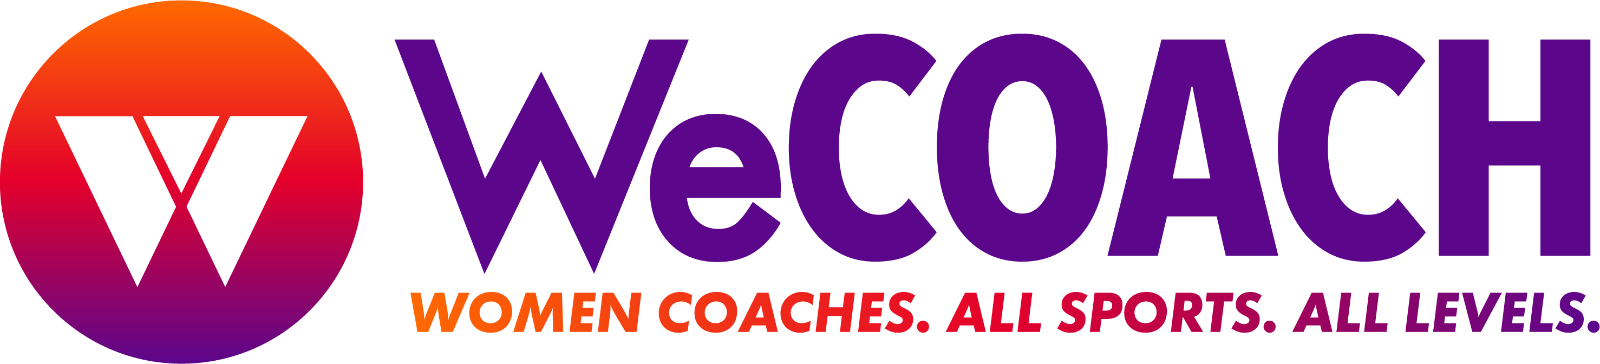 WeCoach_Logo_Horizontal_WithTag%20w%20gradient.png